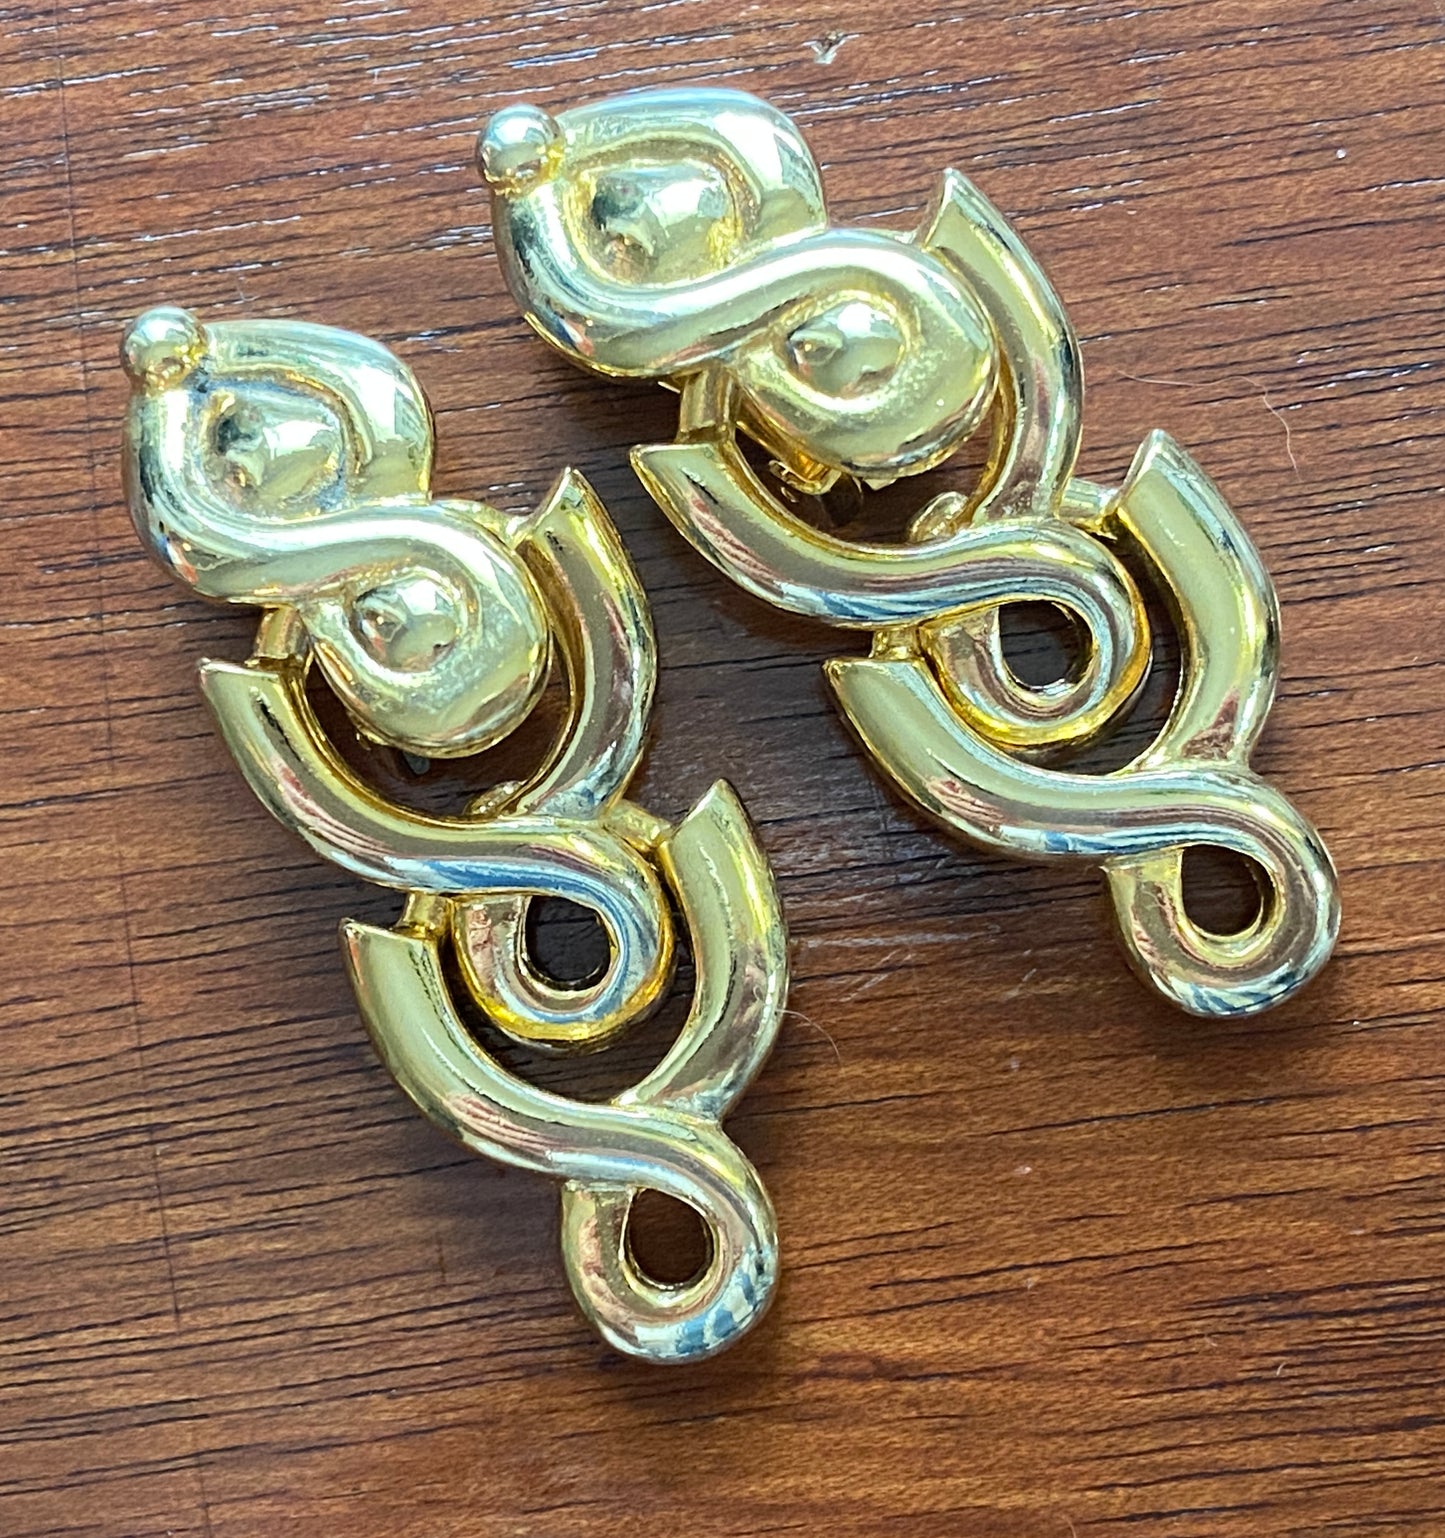 Vintage 80's PAOLO GUCCI Gold Tone Door knocker Clip on Earrings